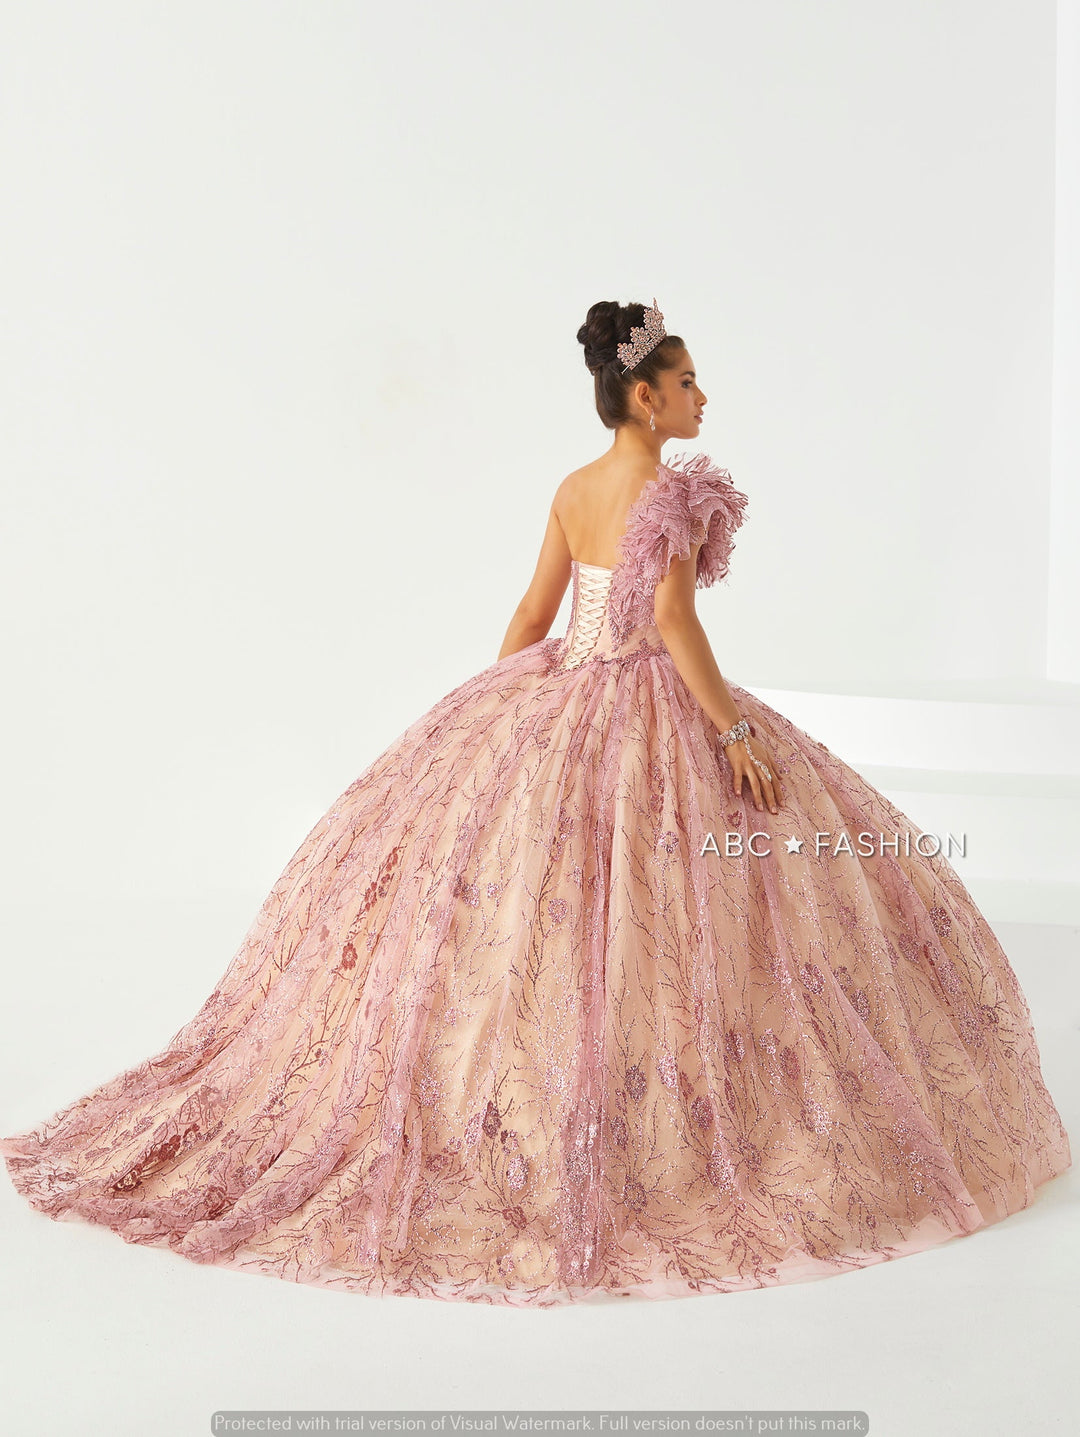 Sweetheart Quinceanera Dress by Fiesta Gowns 56440